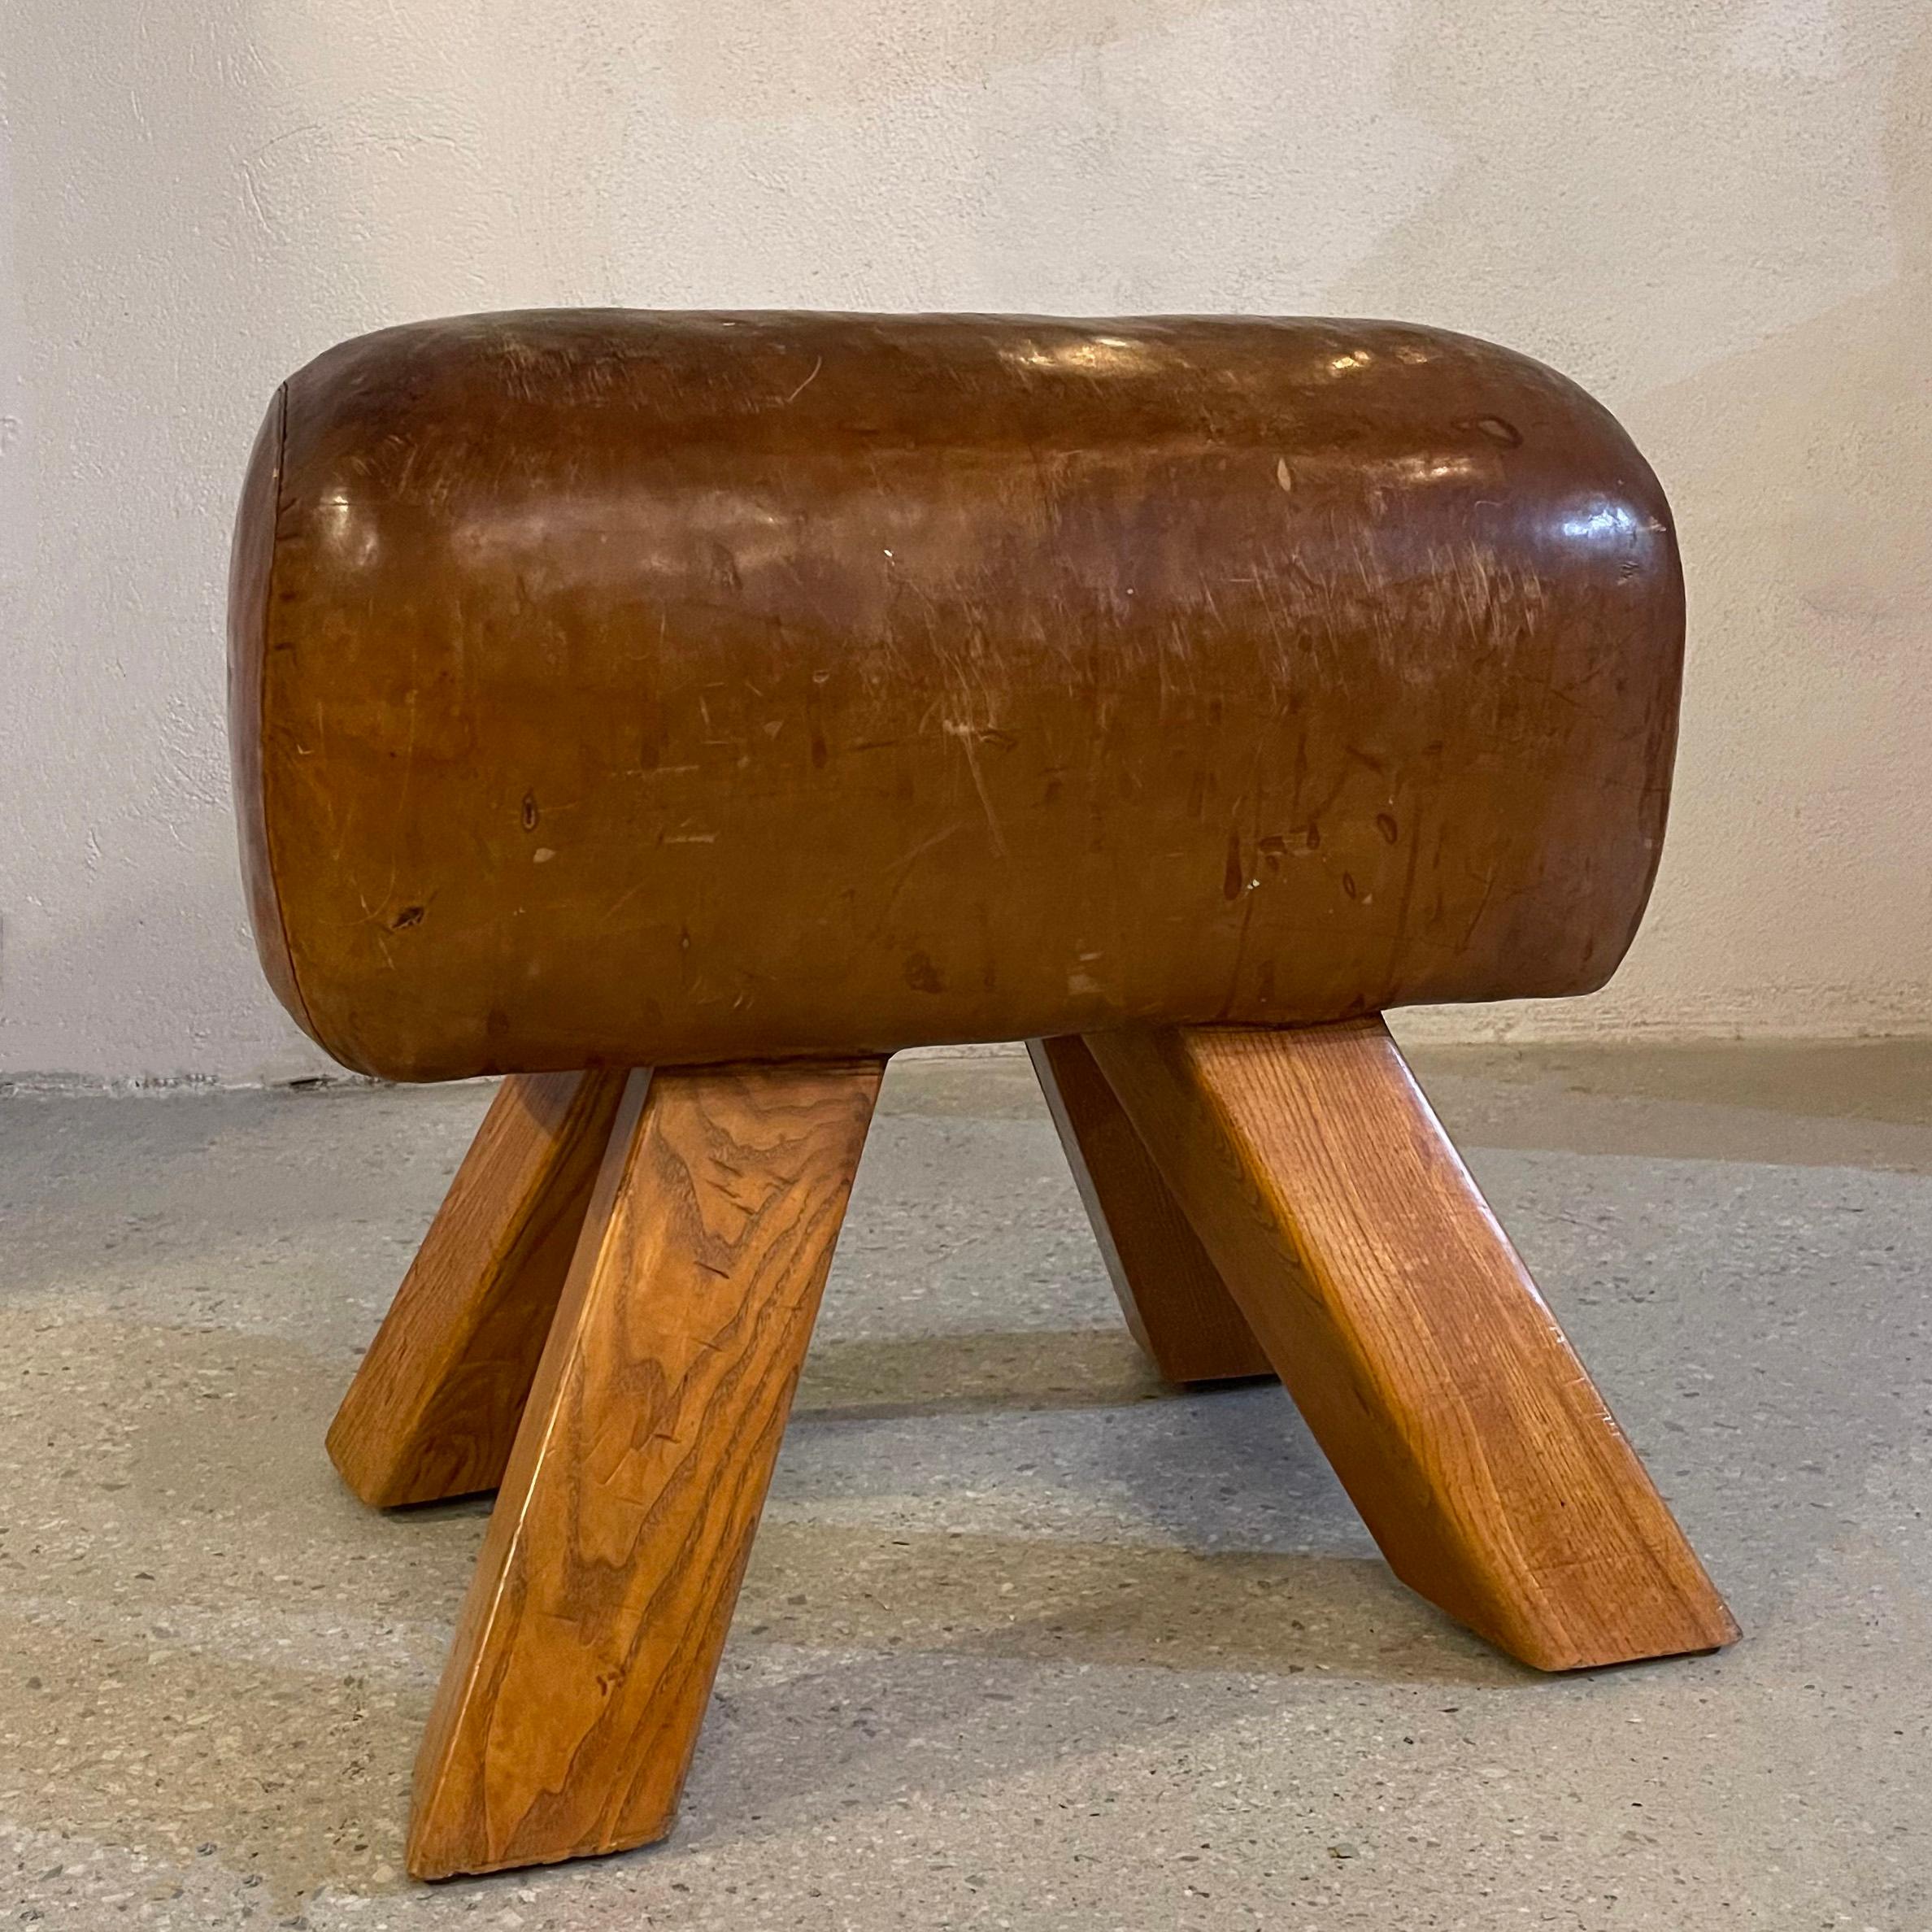 Vintage, industrial, gymnastic, leather, pommel horse bench or ottoman circa 1940's features a wonderfully patinated, rust brown leather seat showing off it's original history with oak legs. A fantastic, rustic industrial edition to an entryway or